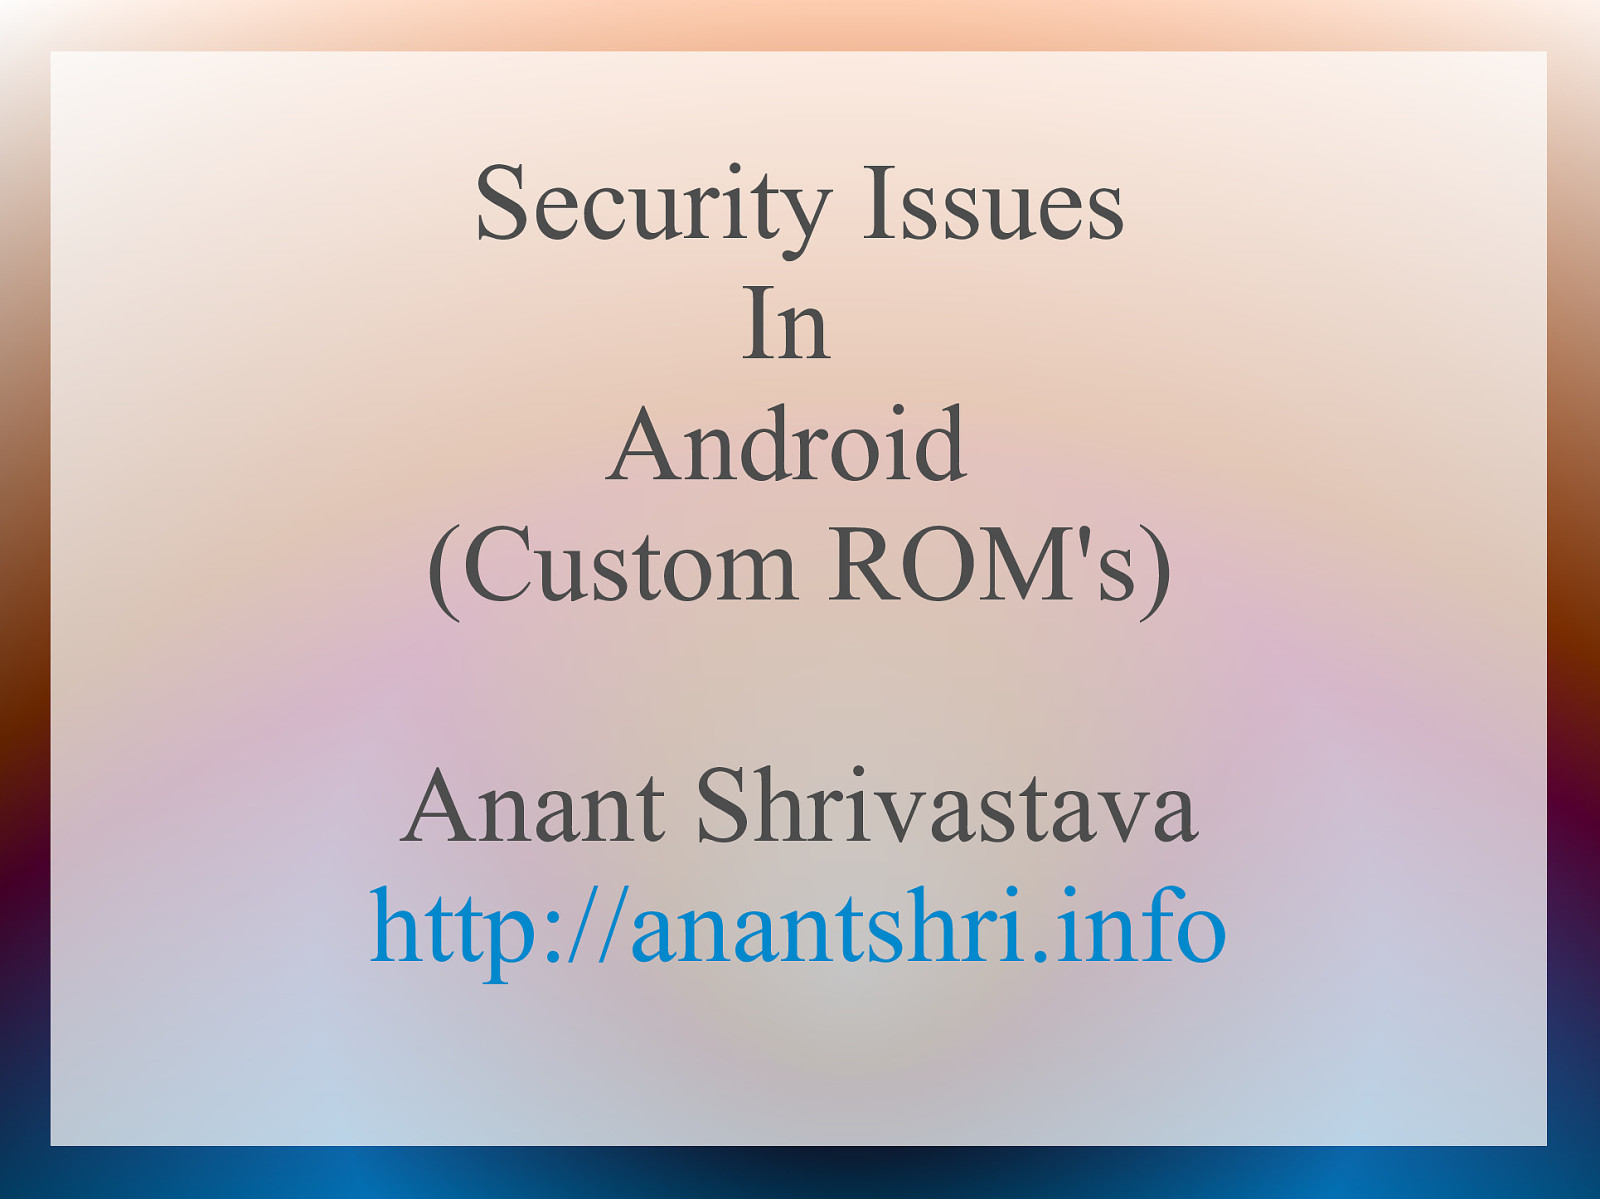 Security Issues in Android Custom ROM’s